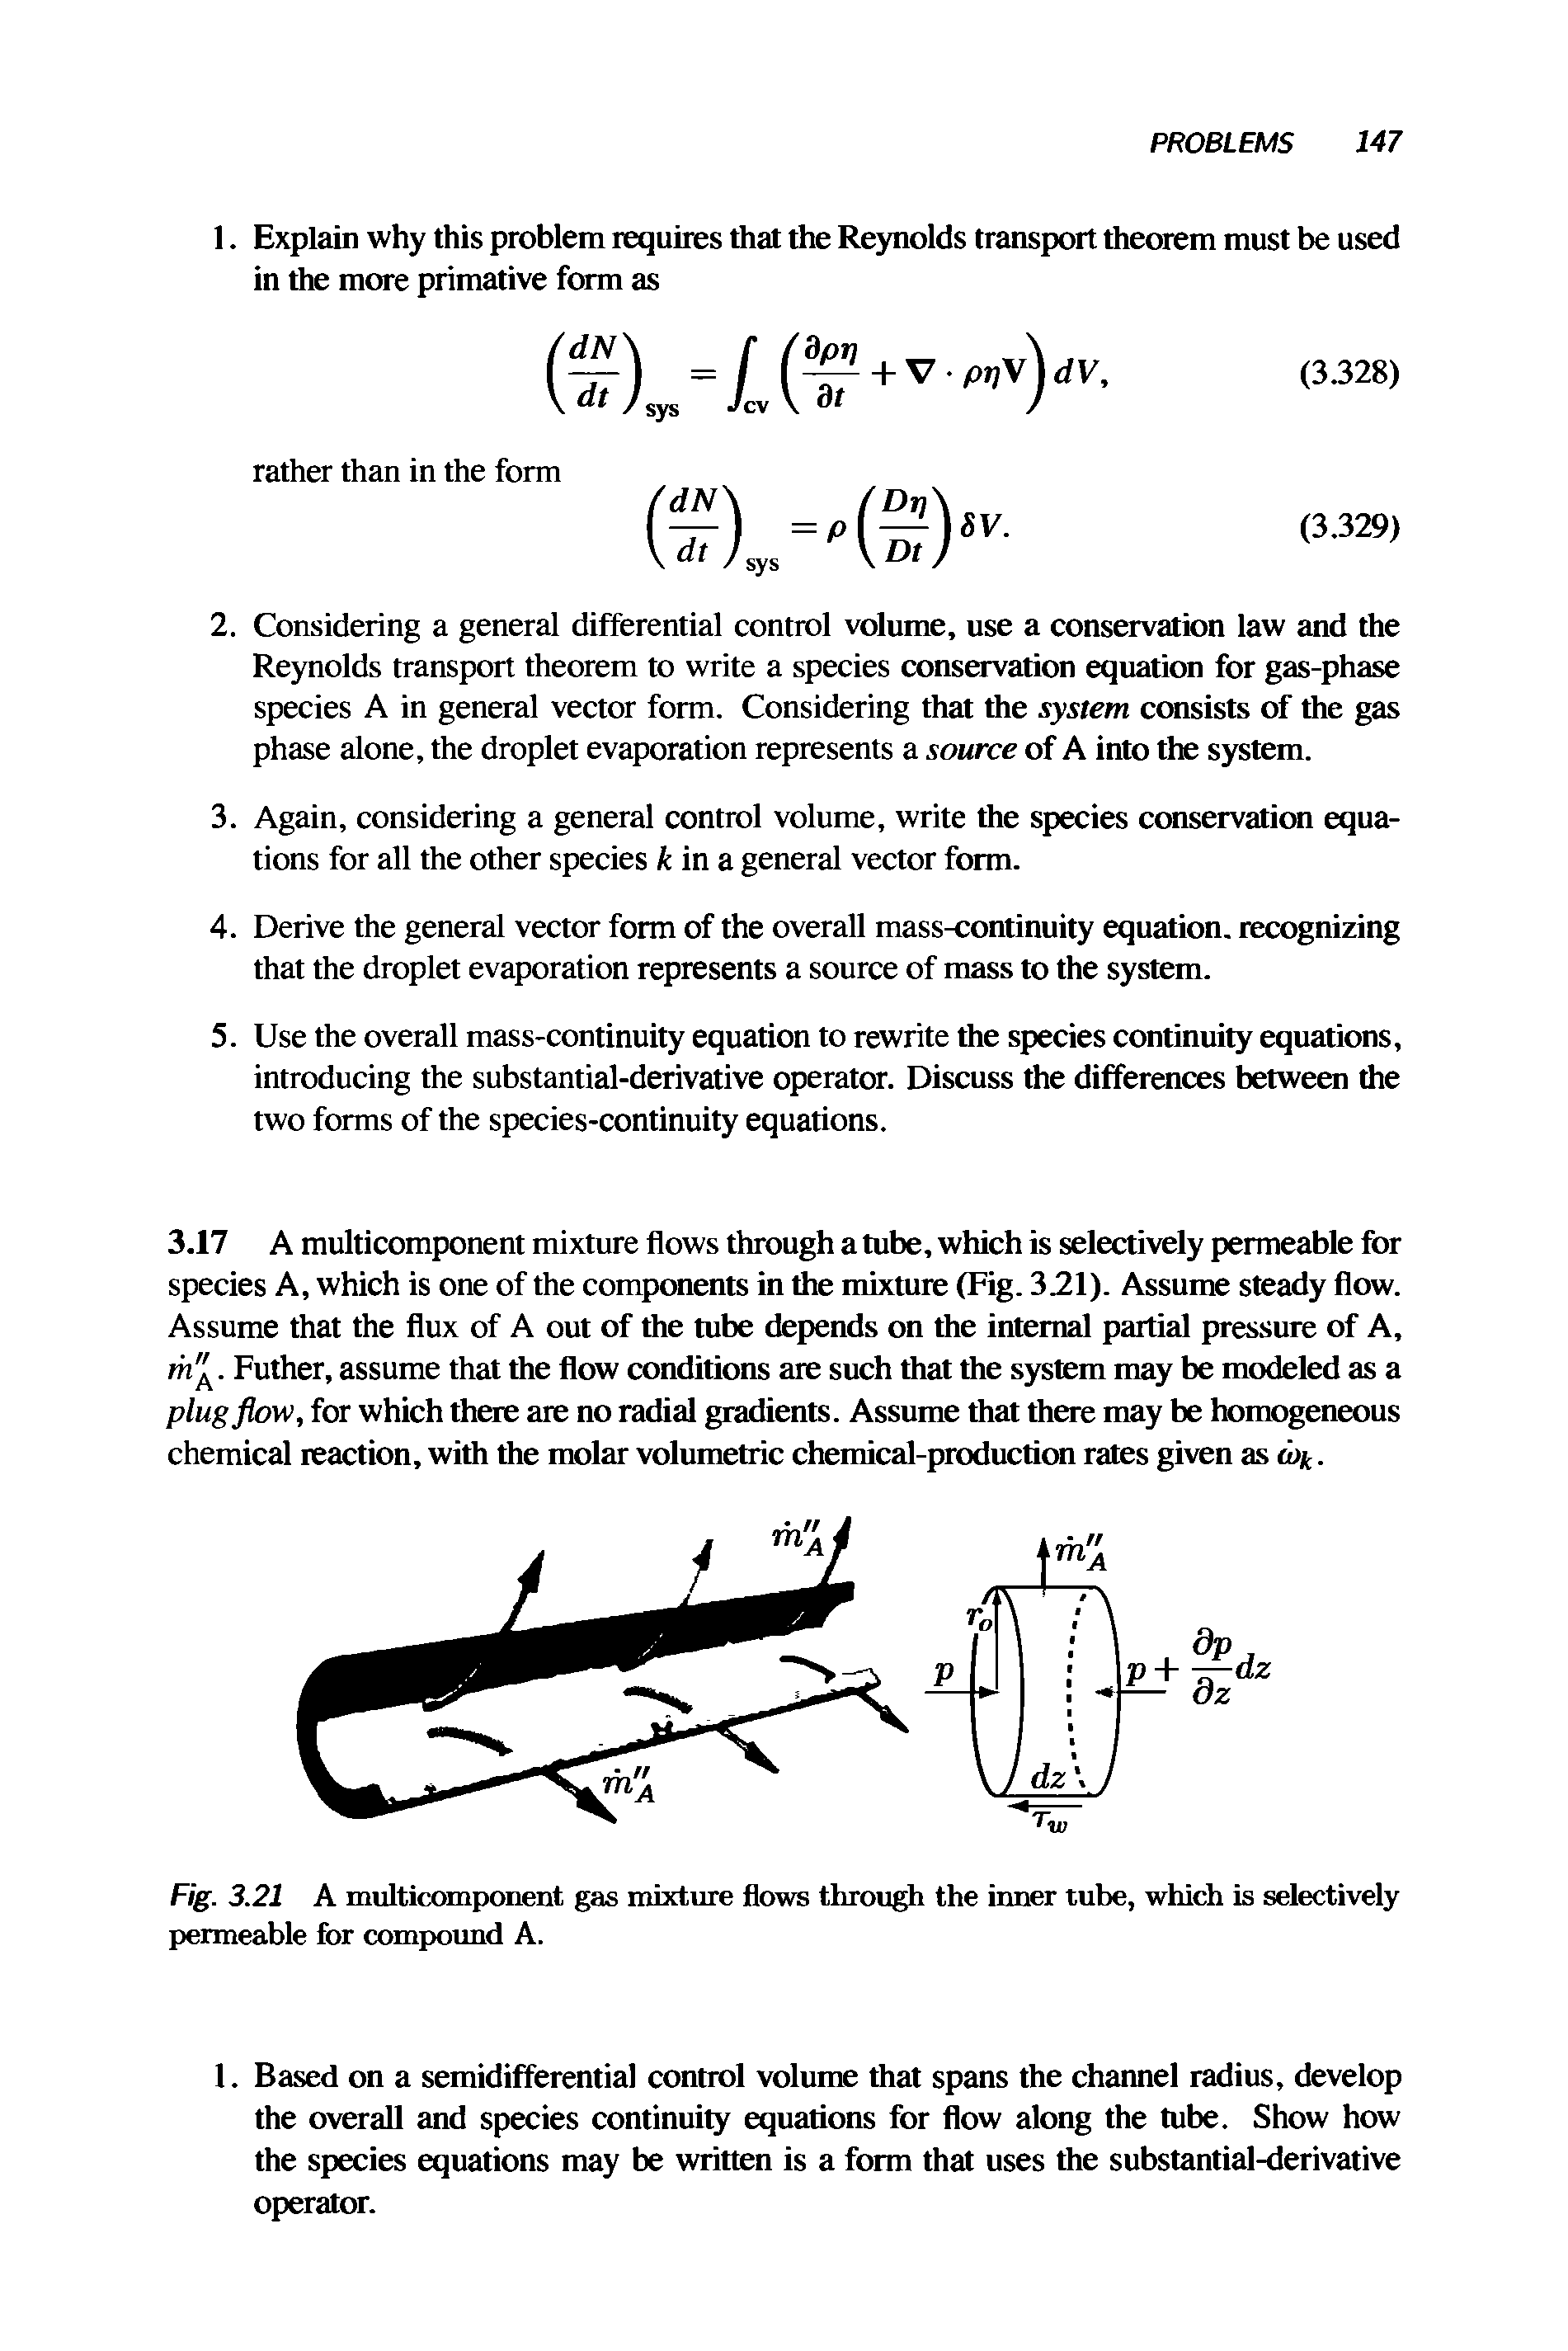 Fig. 3.21 A multicomponent gas mixture flows through the inner tube, which is selectively permeable for compound A.